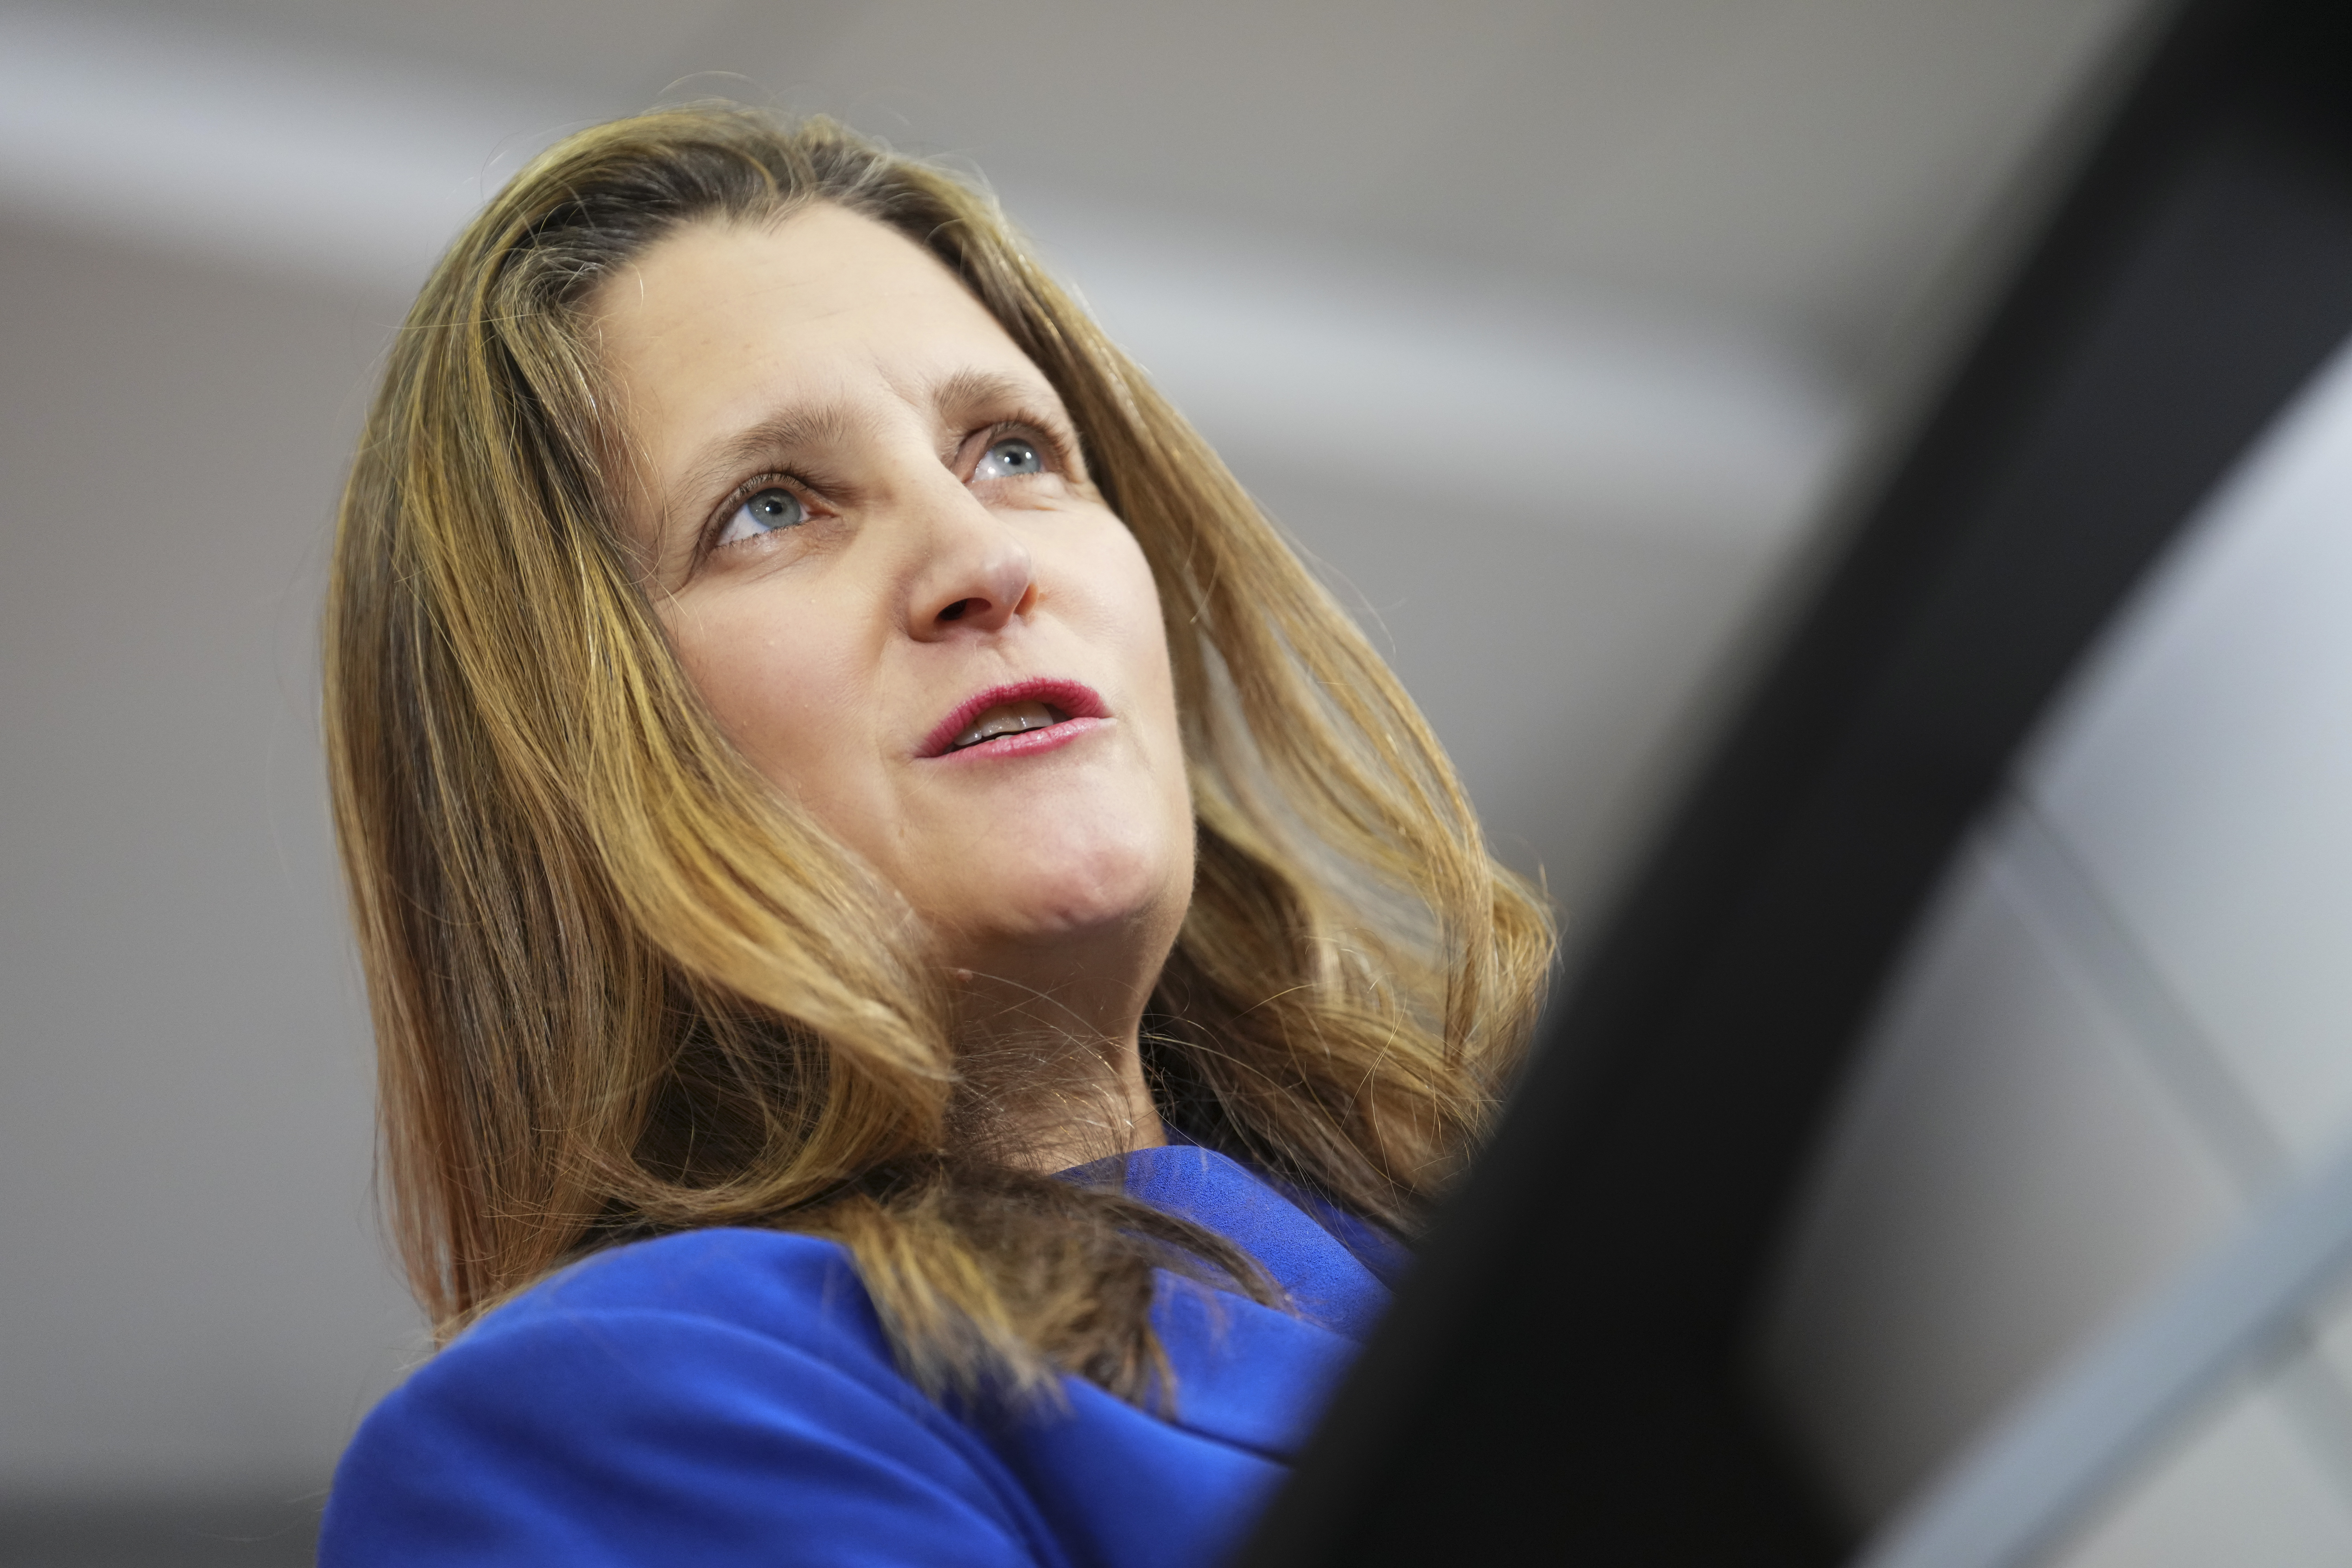 ‘Supply, supply, supply’: Freeland tees up fall economic statement